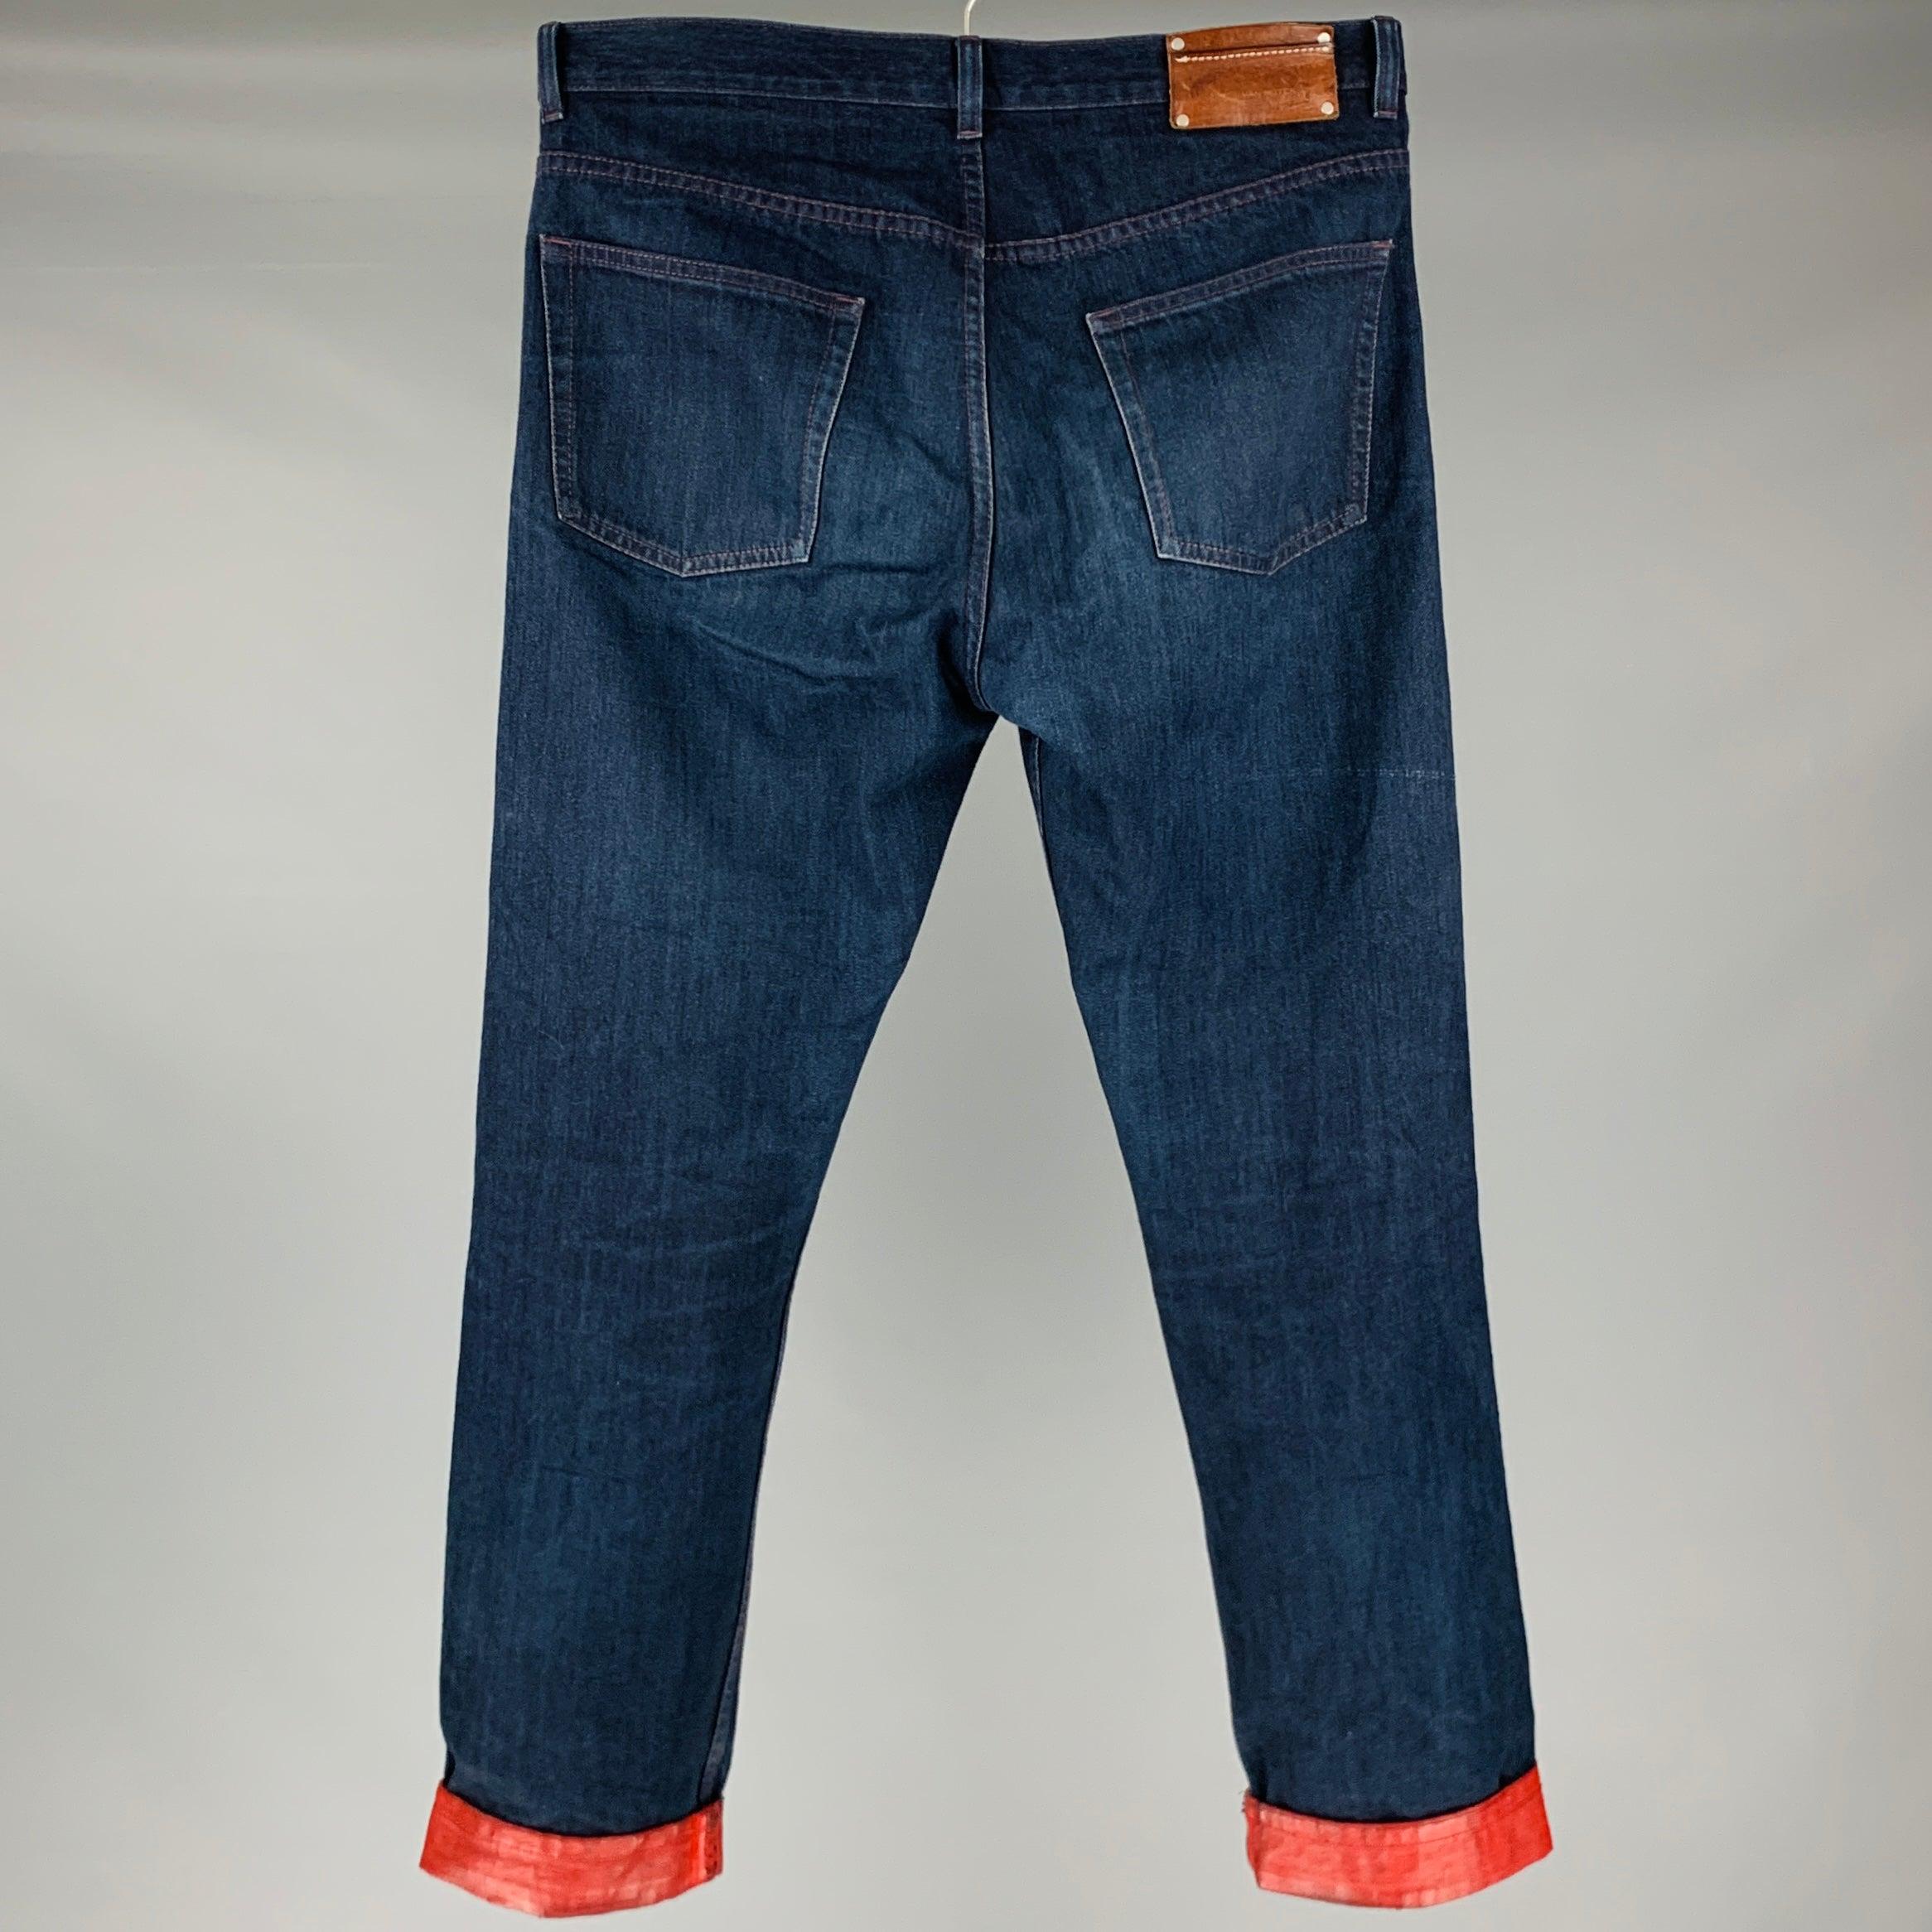 DRIES VAN NOTEN jeans in a navy cotton fabric featuring painted red cuff details, five pocket style, and zip fly closure. Very Good Pre-Owned Condition. Minor signs of wear. 

Marked:   30 

Measurements: 
  Waist: 30 inches Rise: 9 inches Inseam: